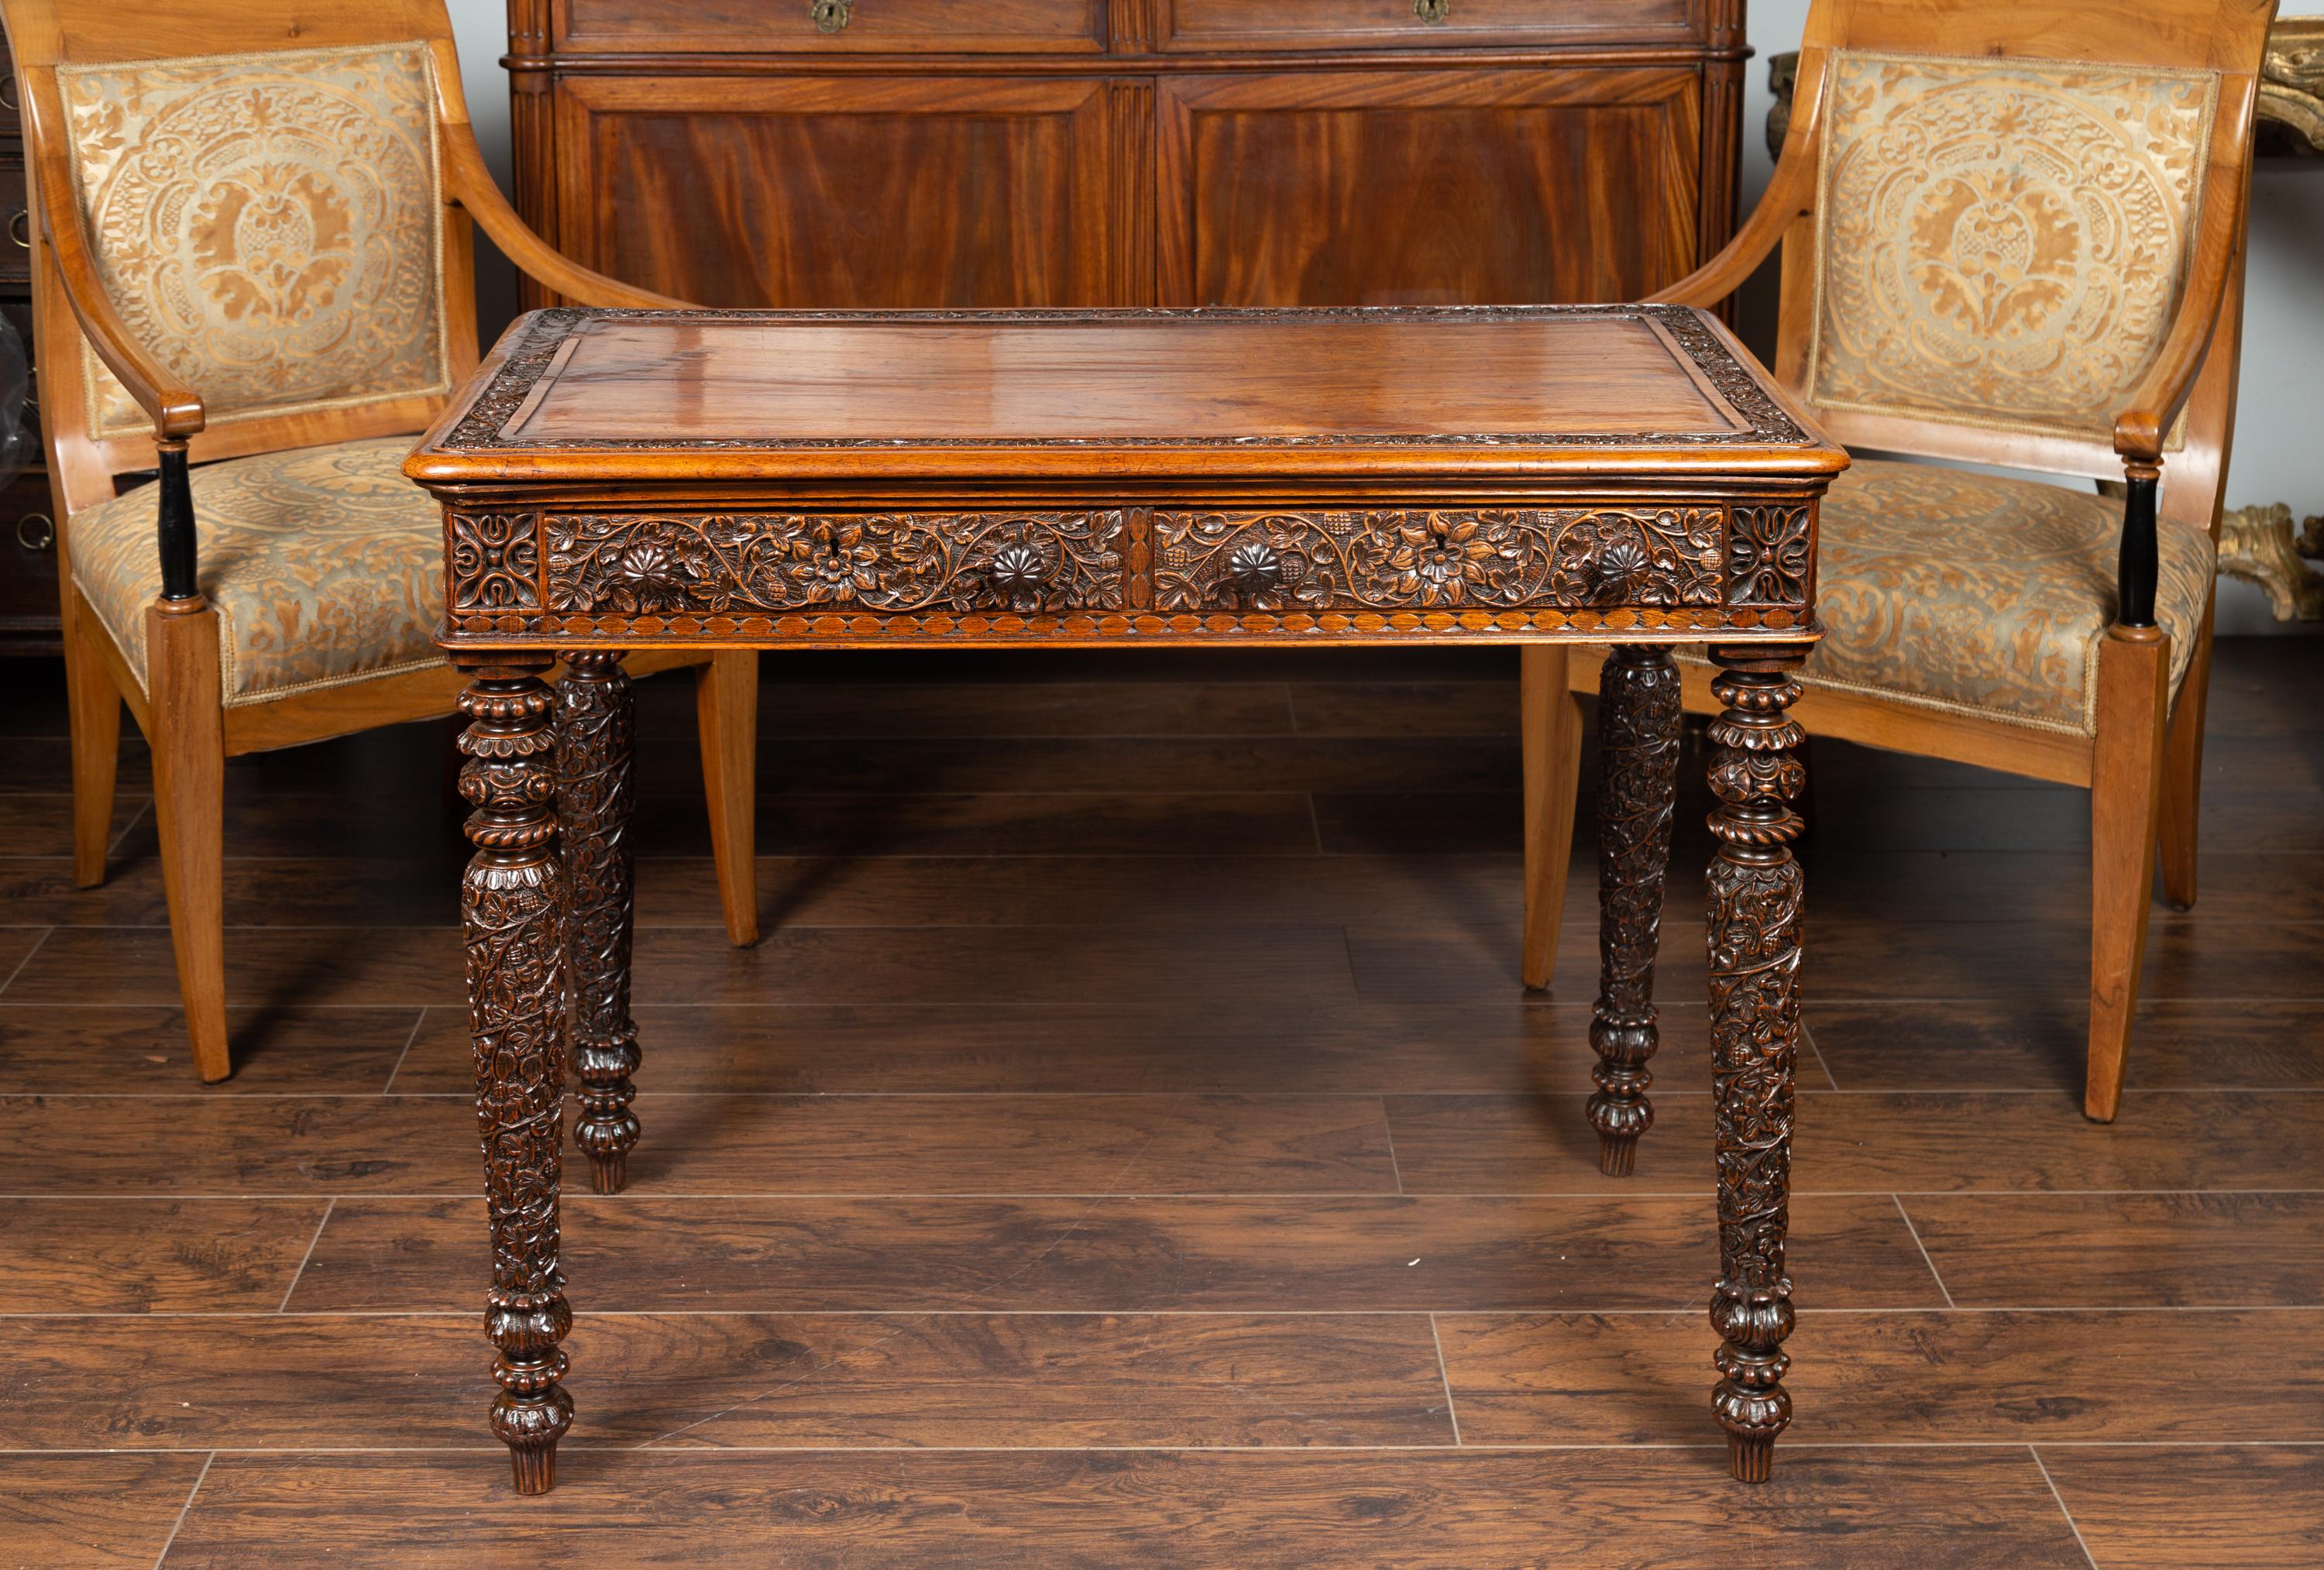 Oak Foliage Carved 1900s Anglo-Indian Table with Two Drawers and Turned Legs